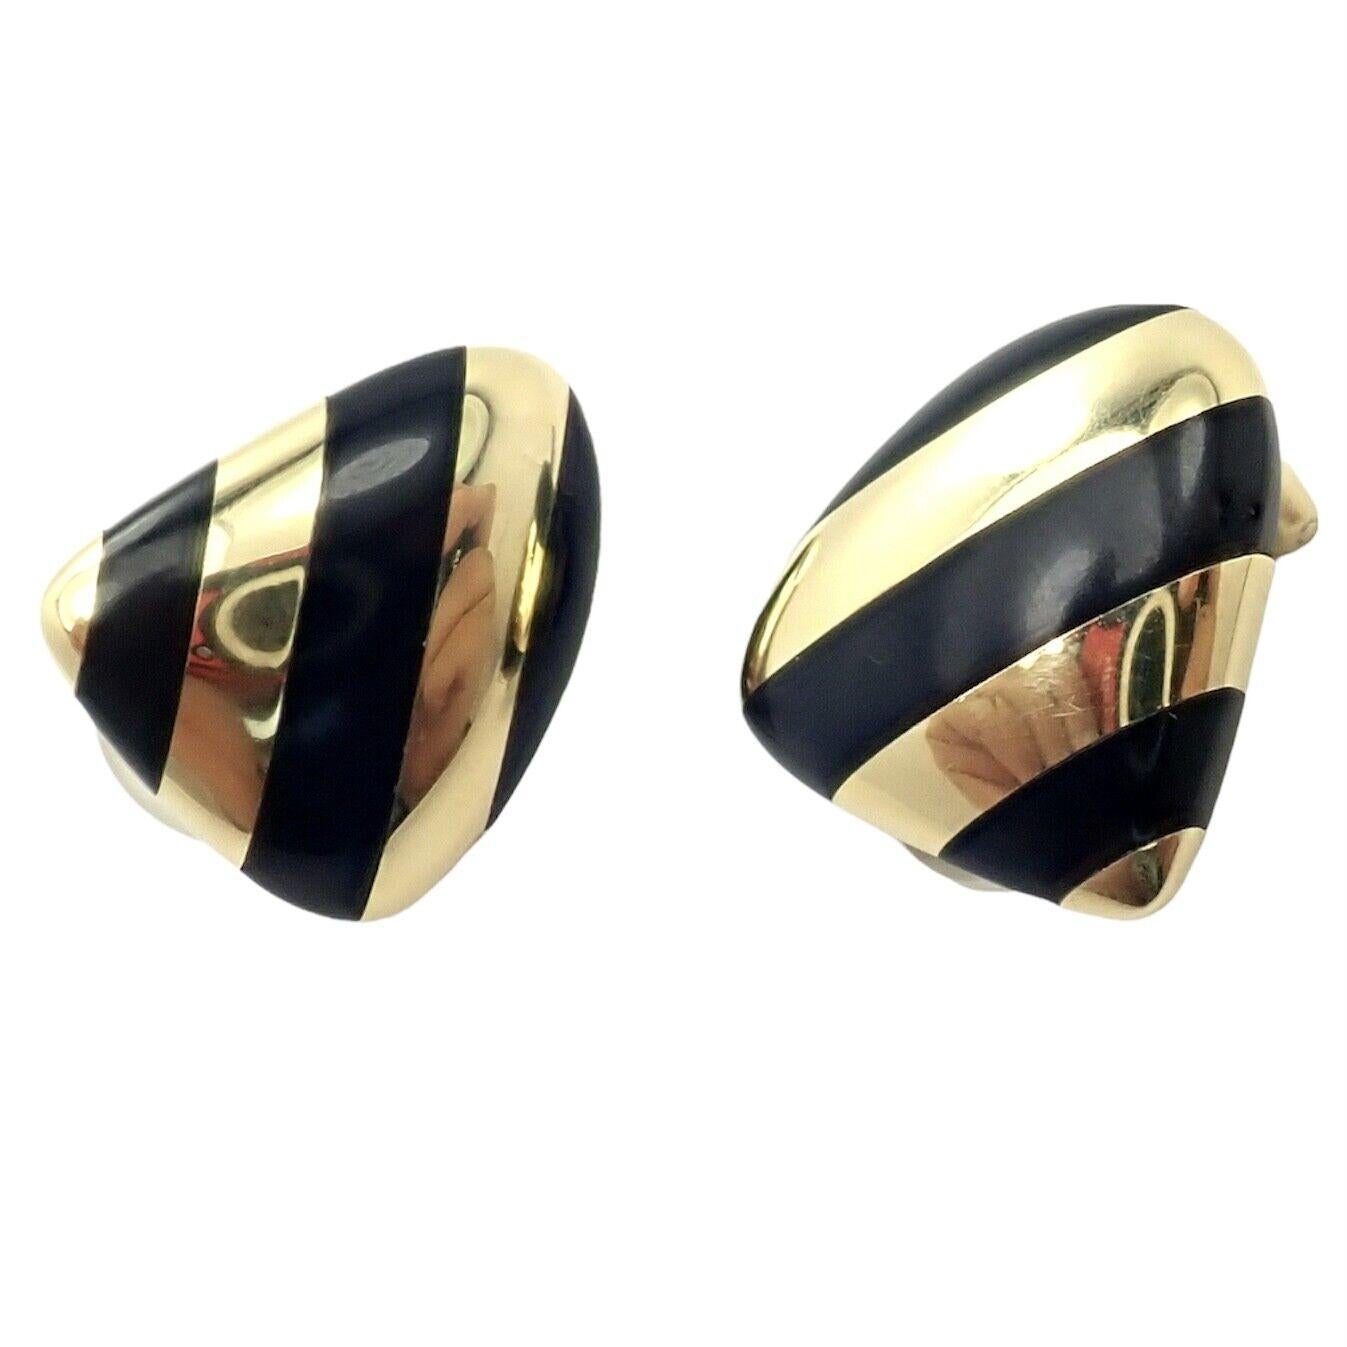 Tiffany & Co. Angela Cummings Inlaid Black Jade Yellow Gold Earrings In Excellent Condition For Sale In Holland, PA